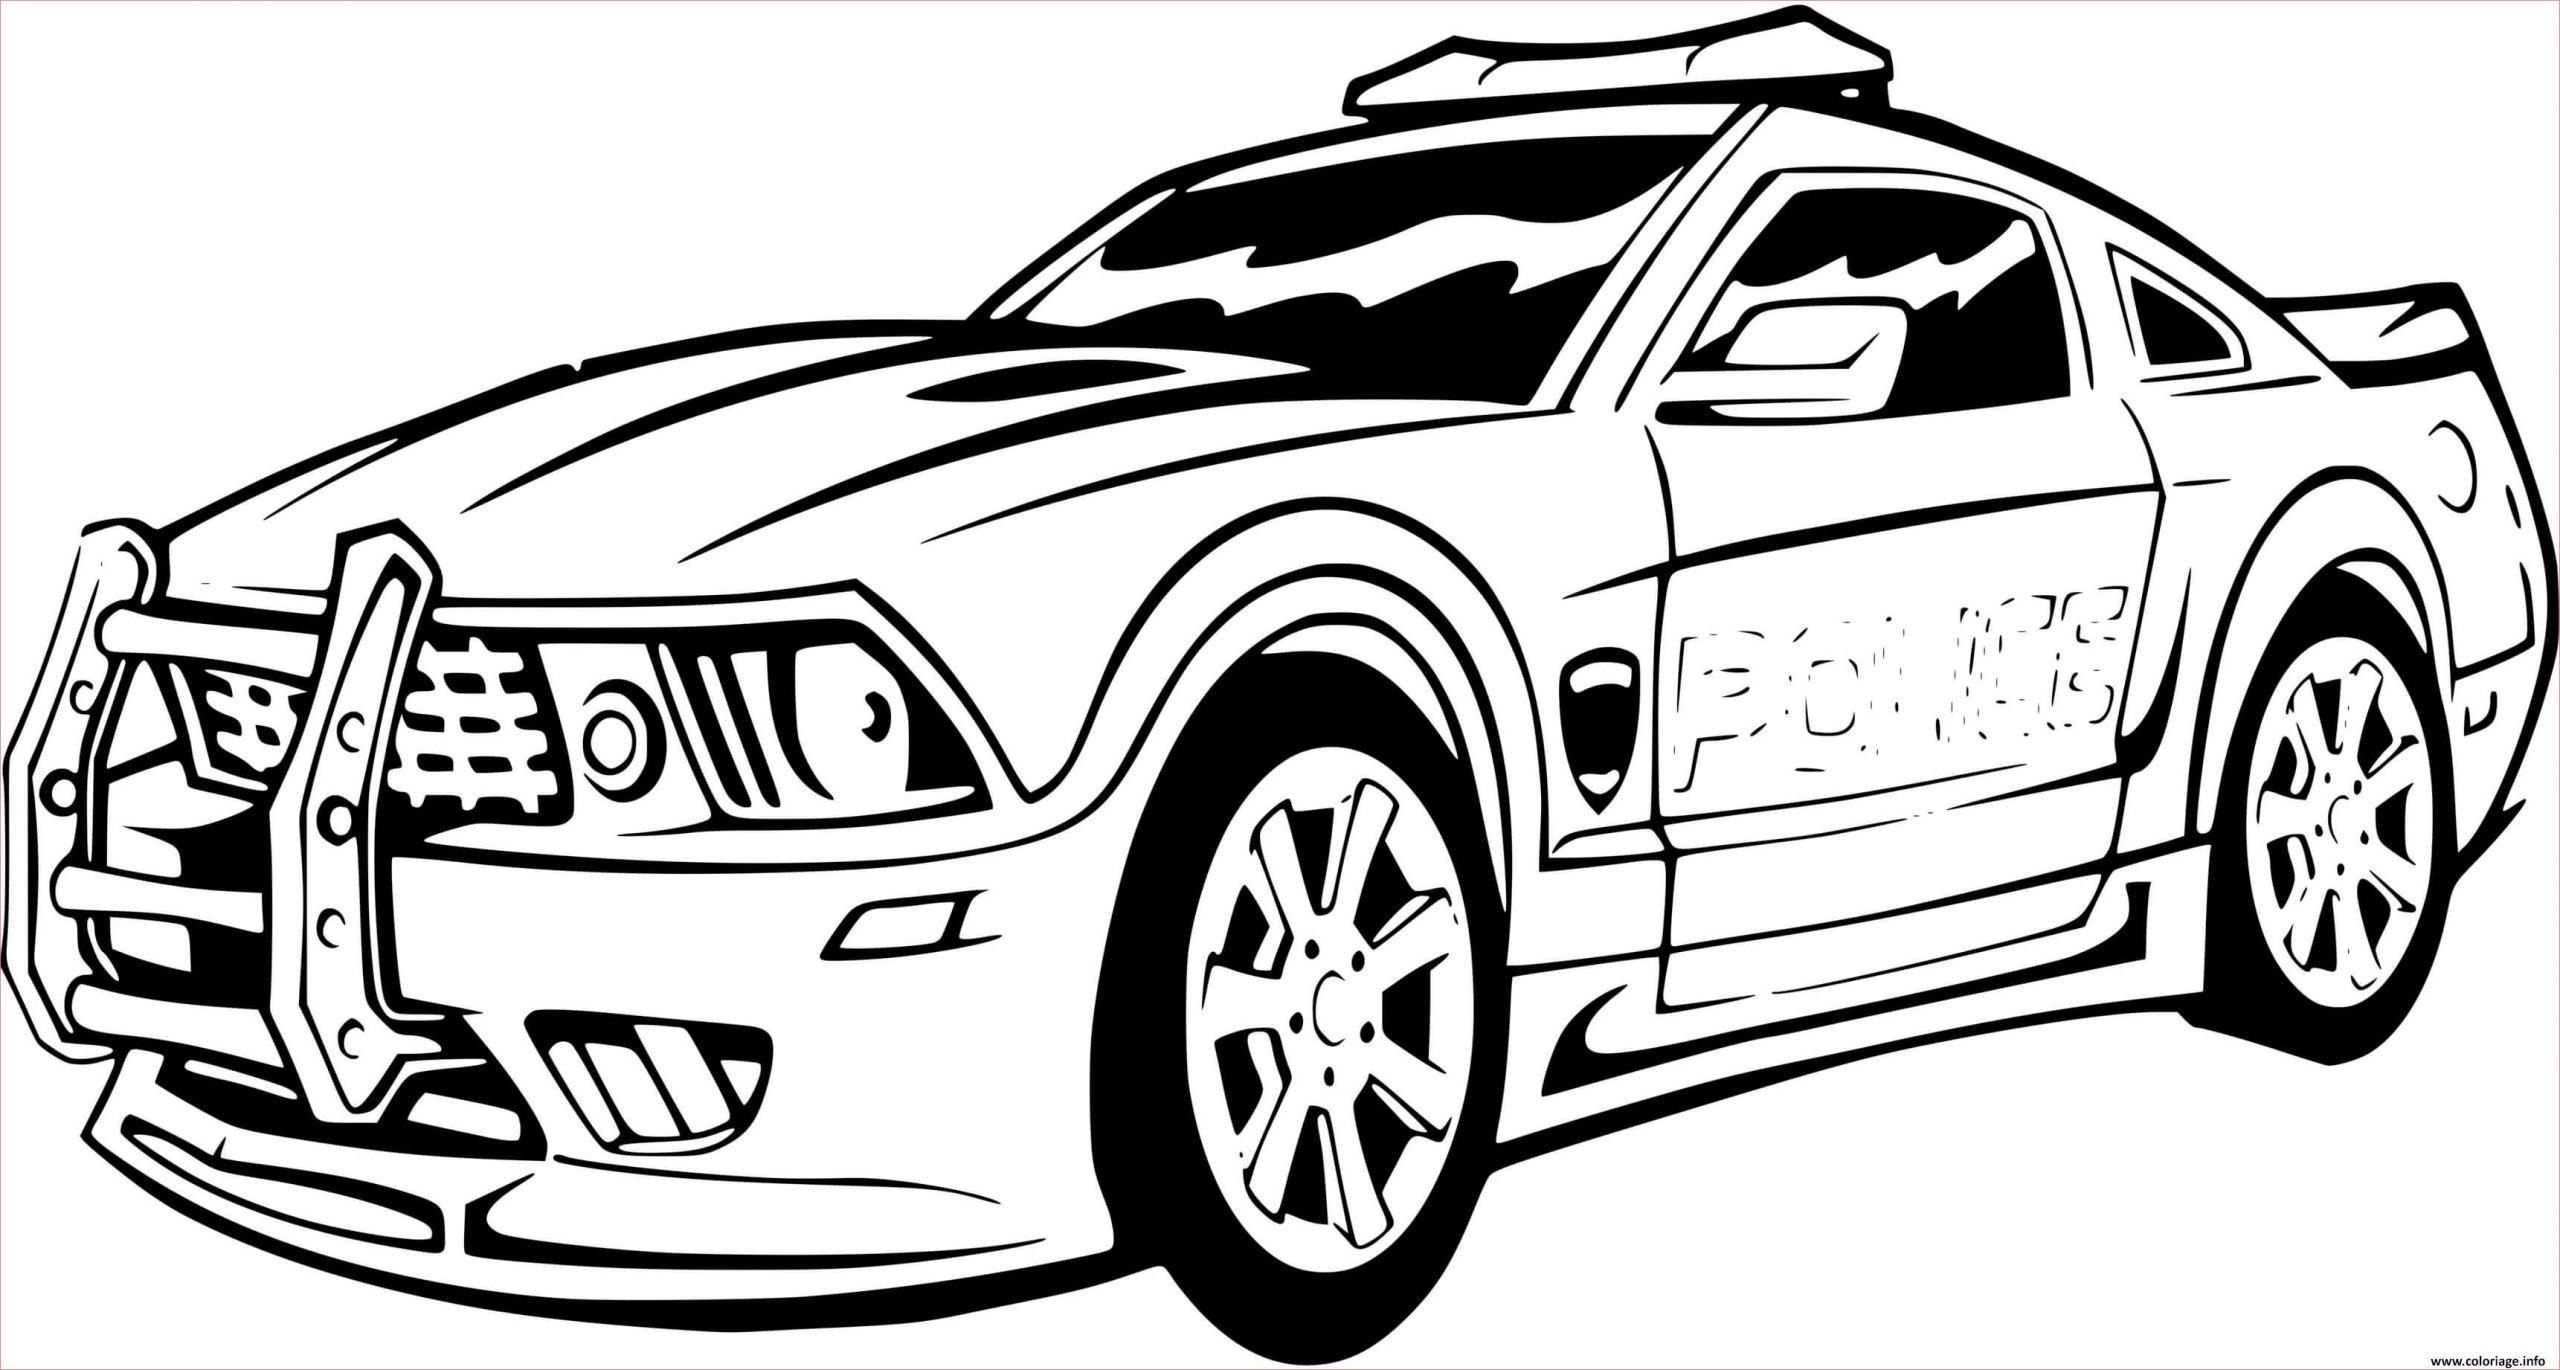 voiture de police sport mustang ford coloriage dessin